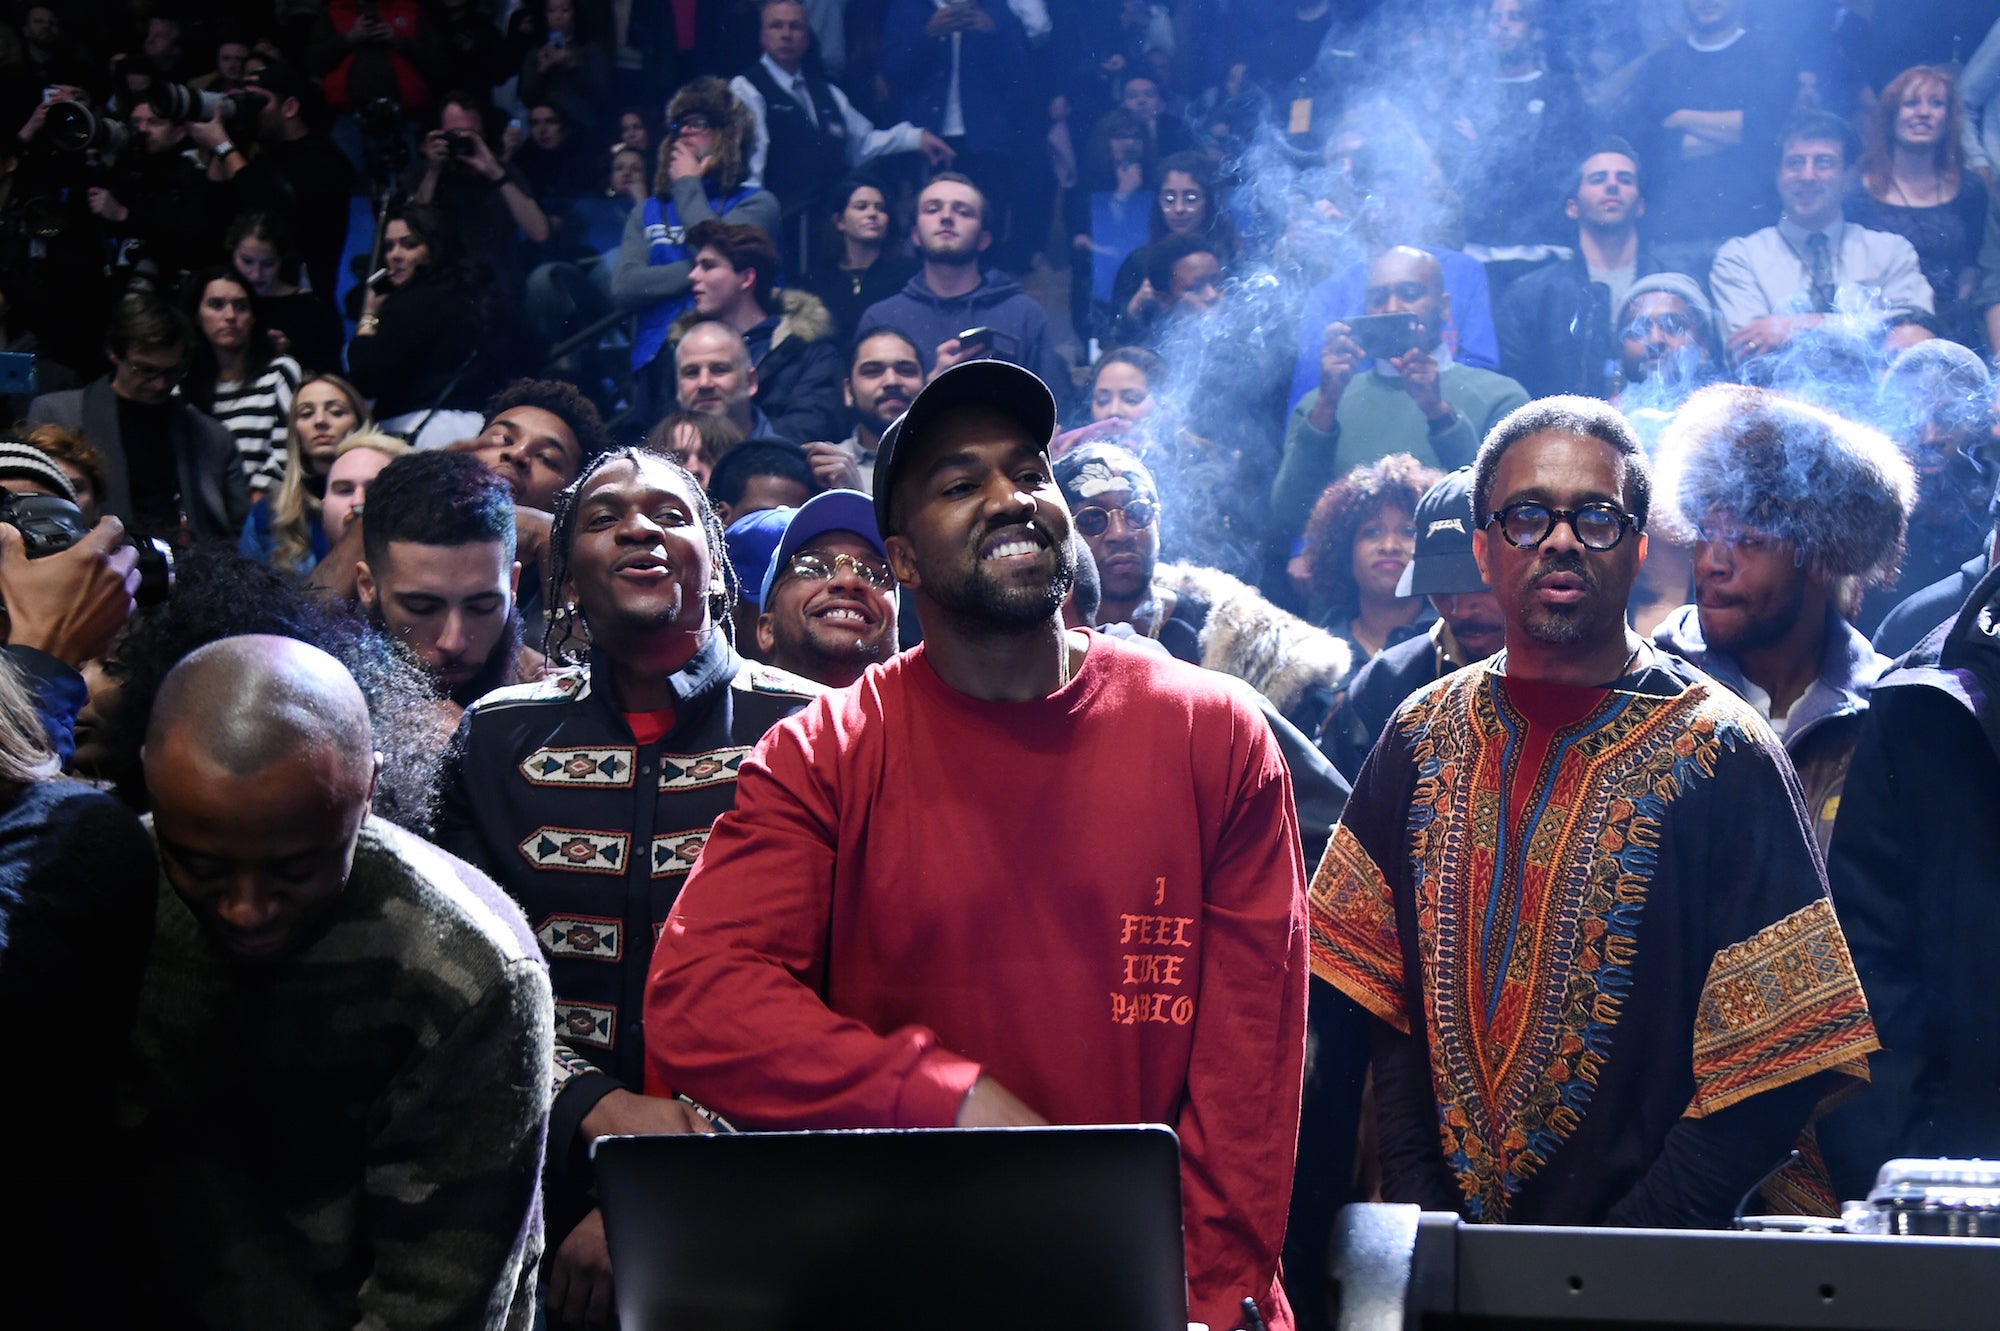 Kanye West's "The Life of Pablo" listening party kicks off New York Fashion Week.